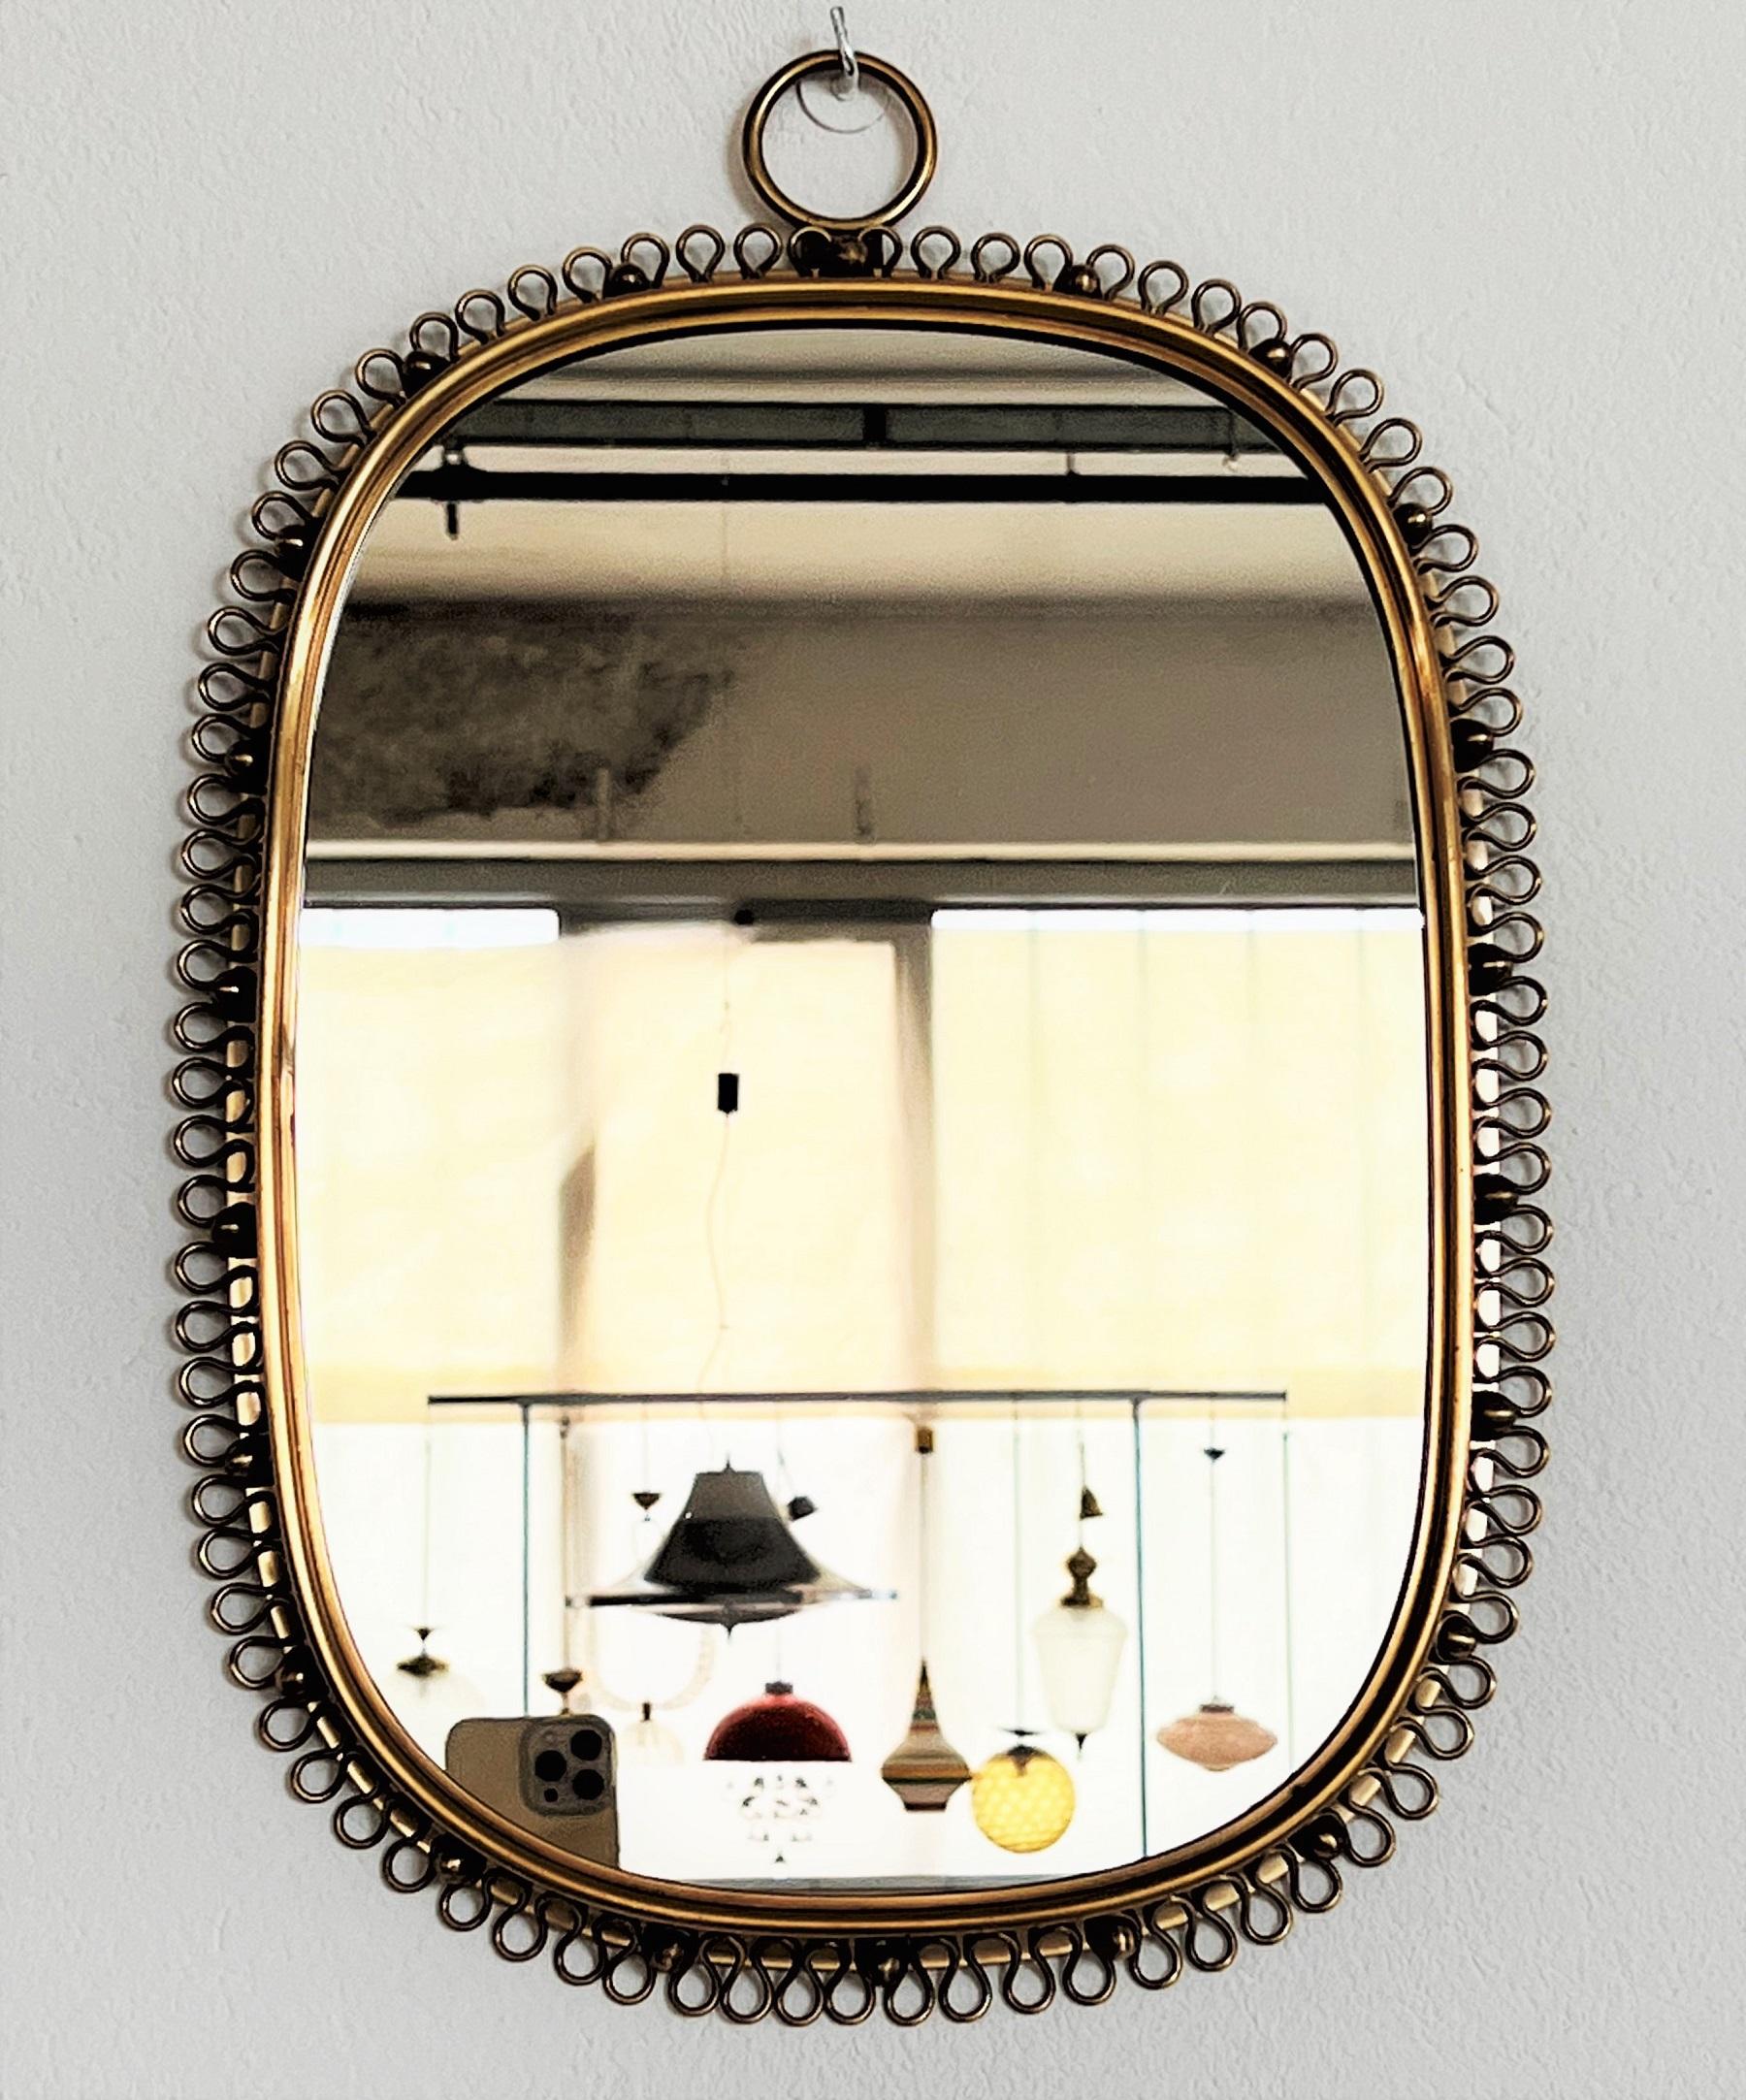 Mid-20th Century Wall Mirror with Loop Frame in Brass by Josef Frank for Svenskt Tenn, 1950s